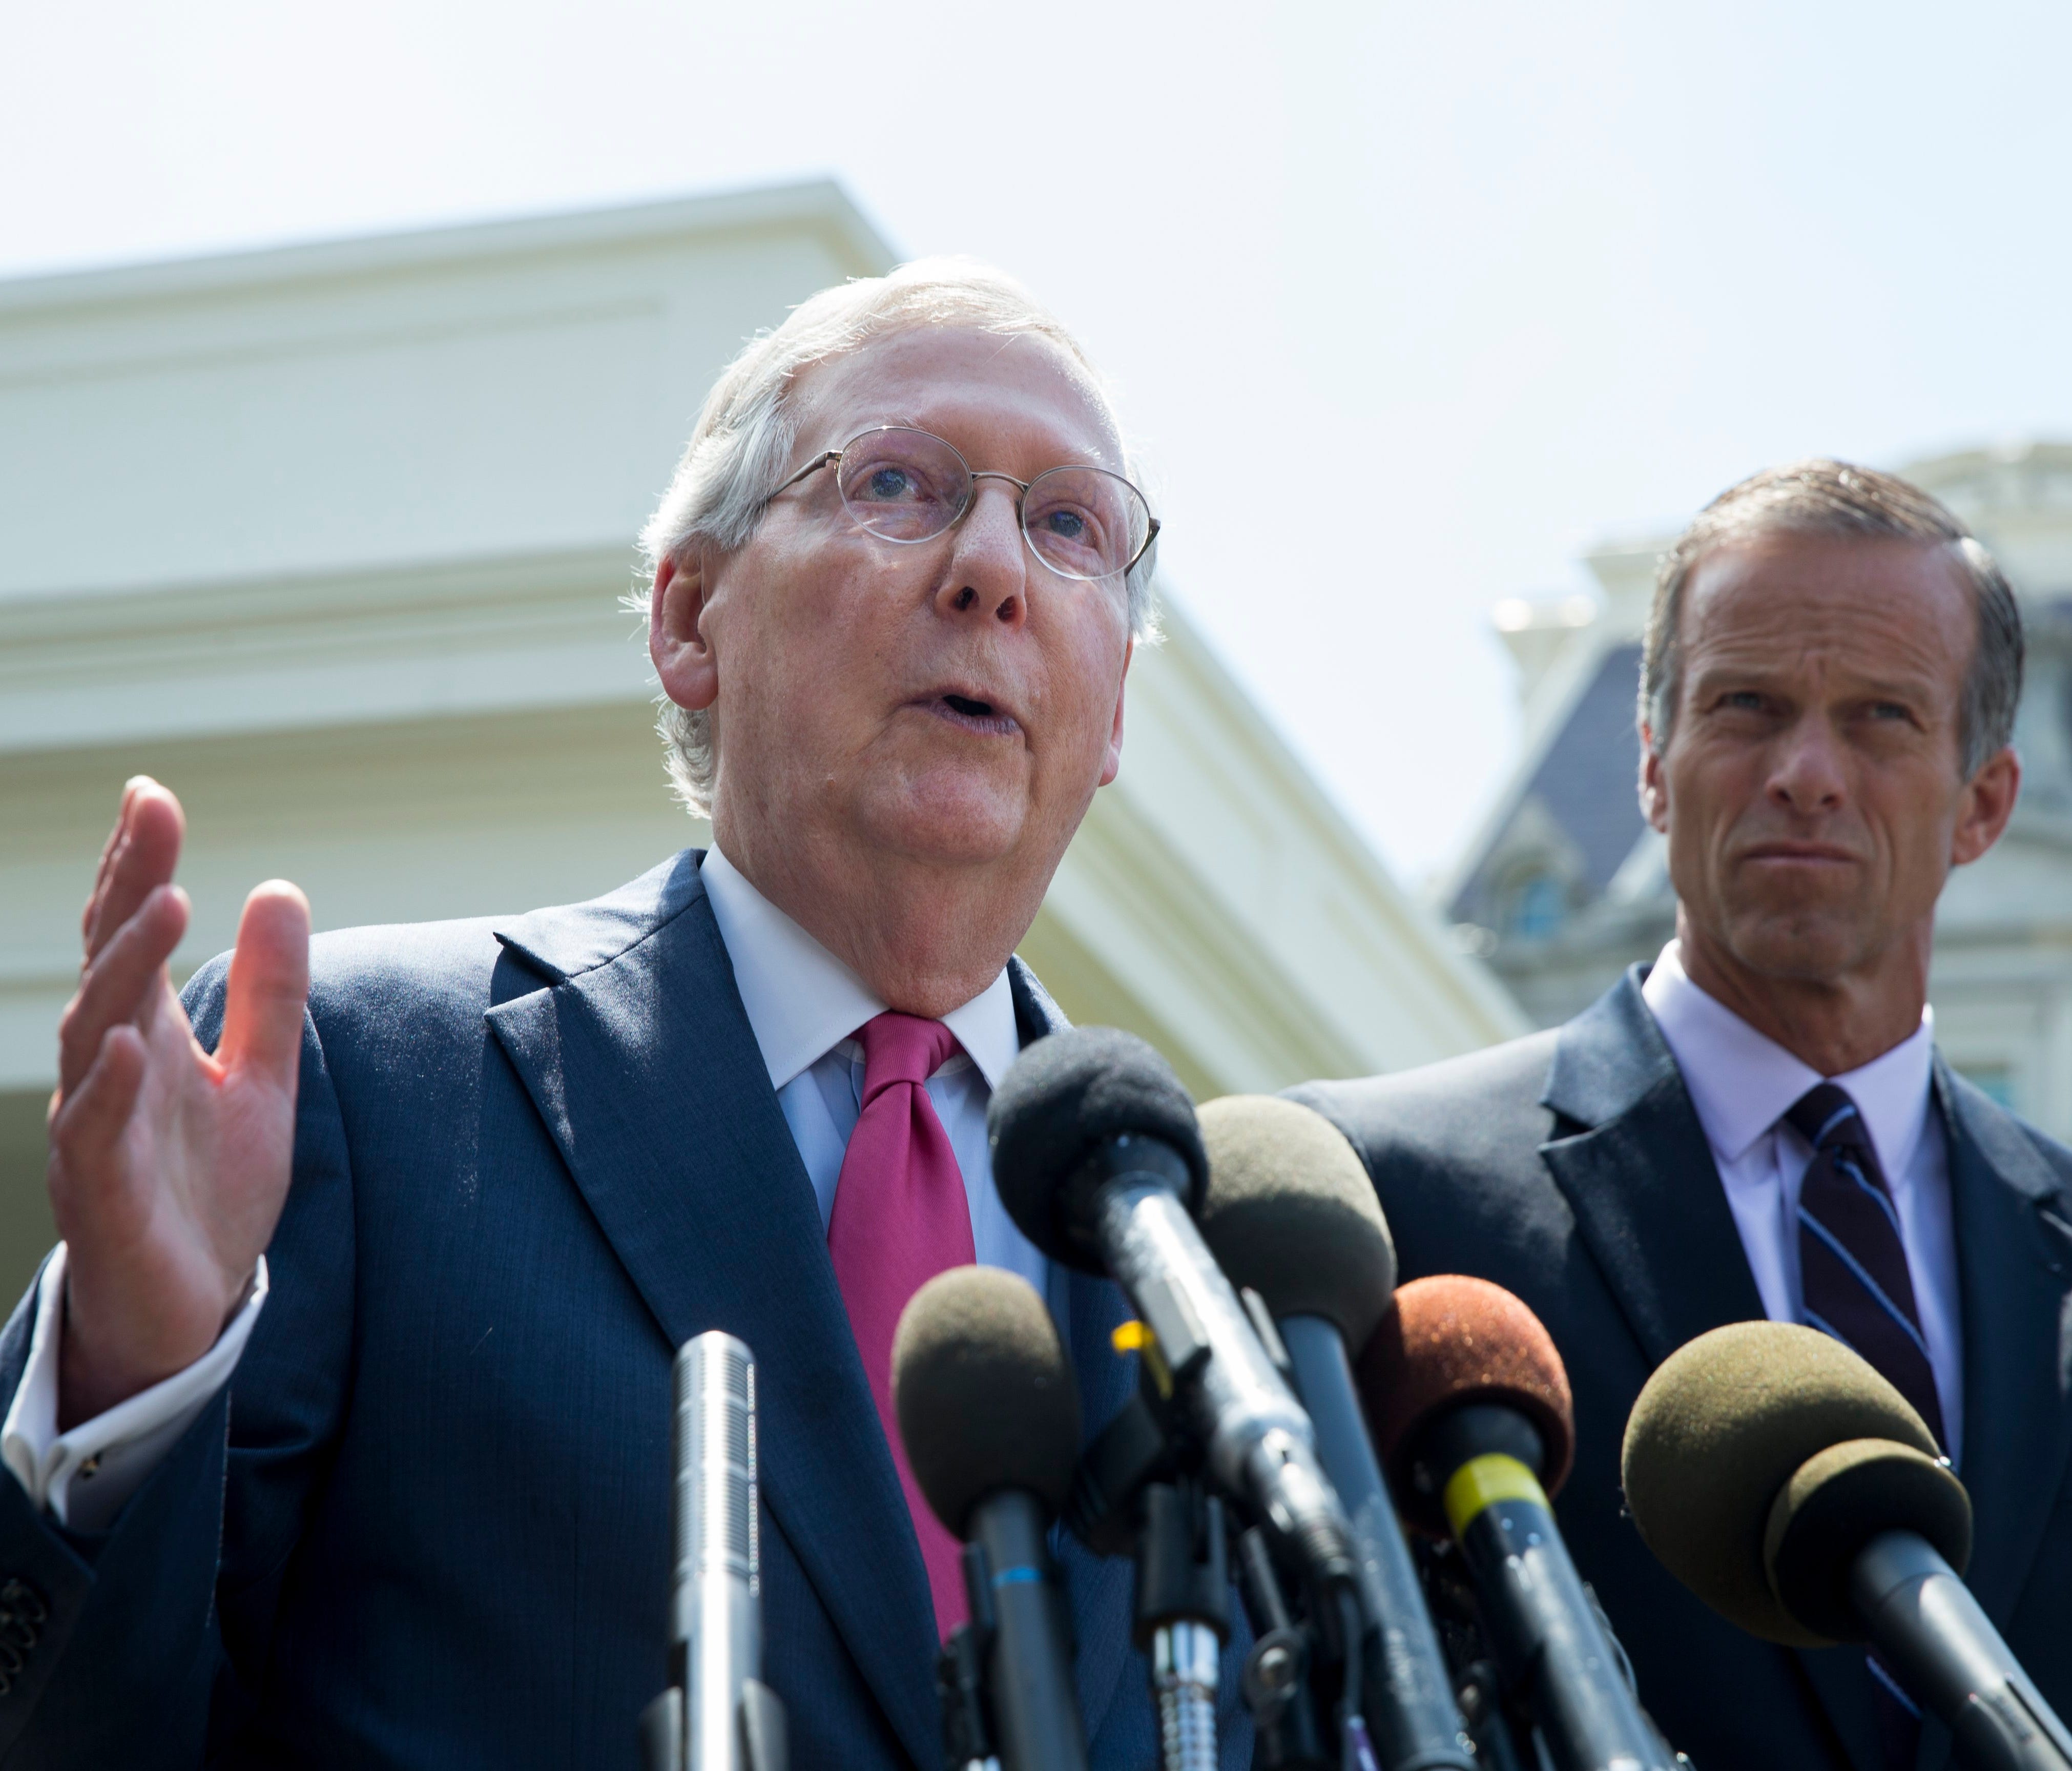 Senate Majority Leader Mitch McConnell delivers remarks on health care to members of the news media following a lunch with President Trump outside the West Wing of the White House on July 19, 2017.